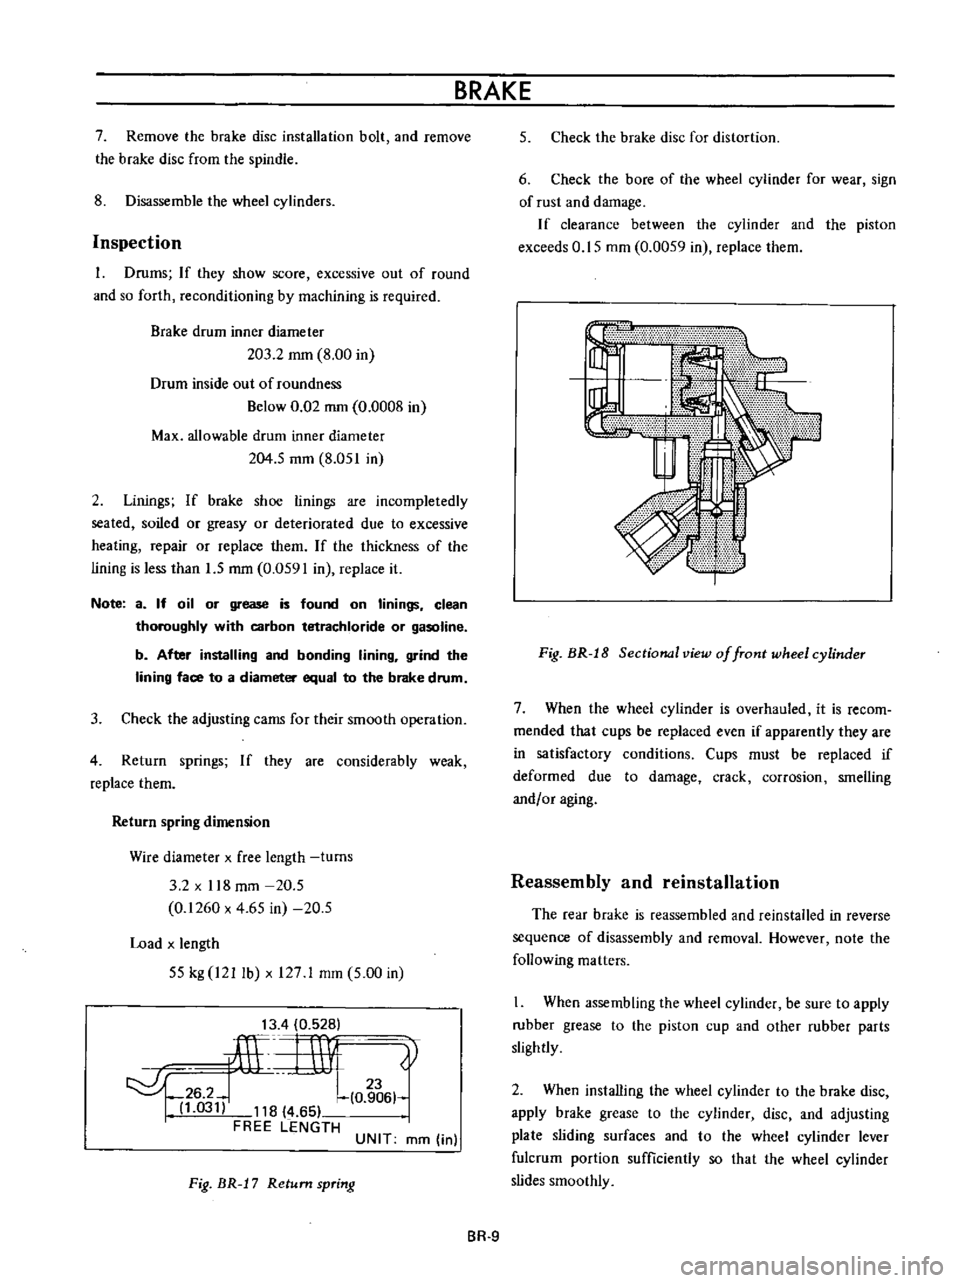 DATSUN B110 1973  Service Repair Manual 
7

Remove 
the

brake 
disc

installation 
bolt 
and 
remove

the 
brake 
disc 
from 
the

spindle

8 
Disassemble

the 
wheel

cylinders

Inspection

l 
Drums

If

they 
show

score 
excessive 
out 